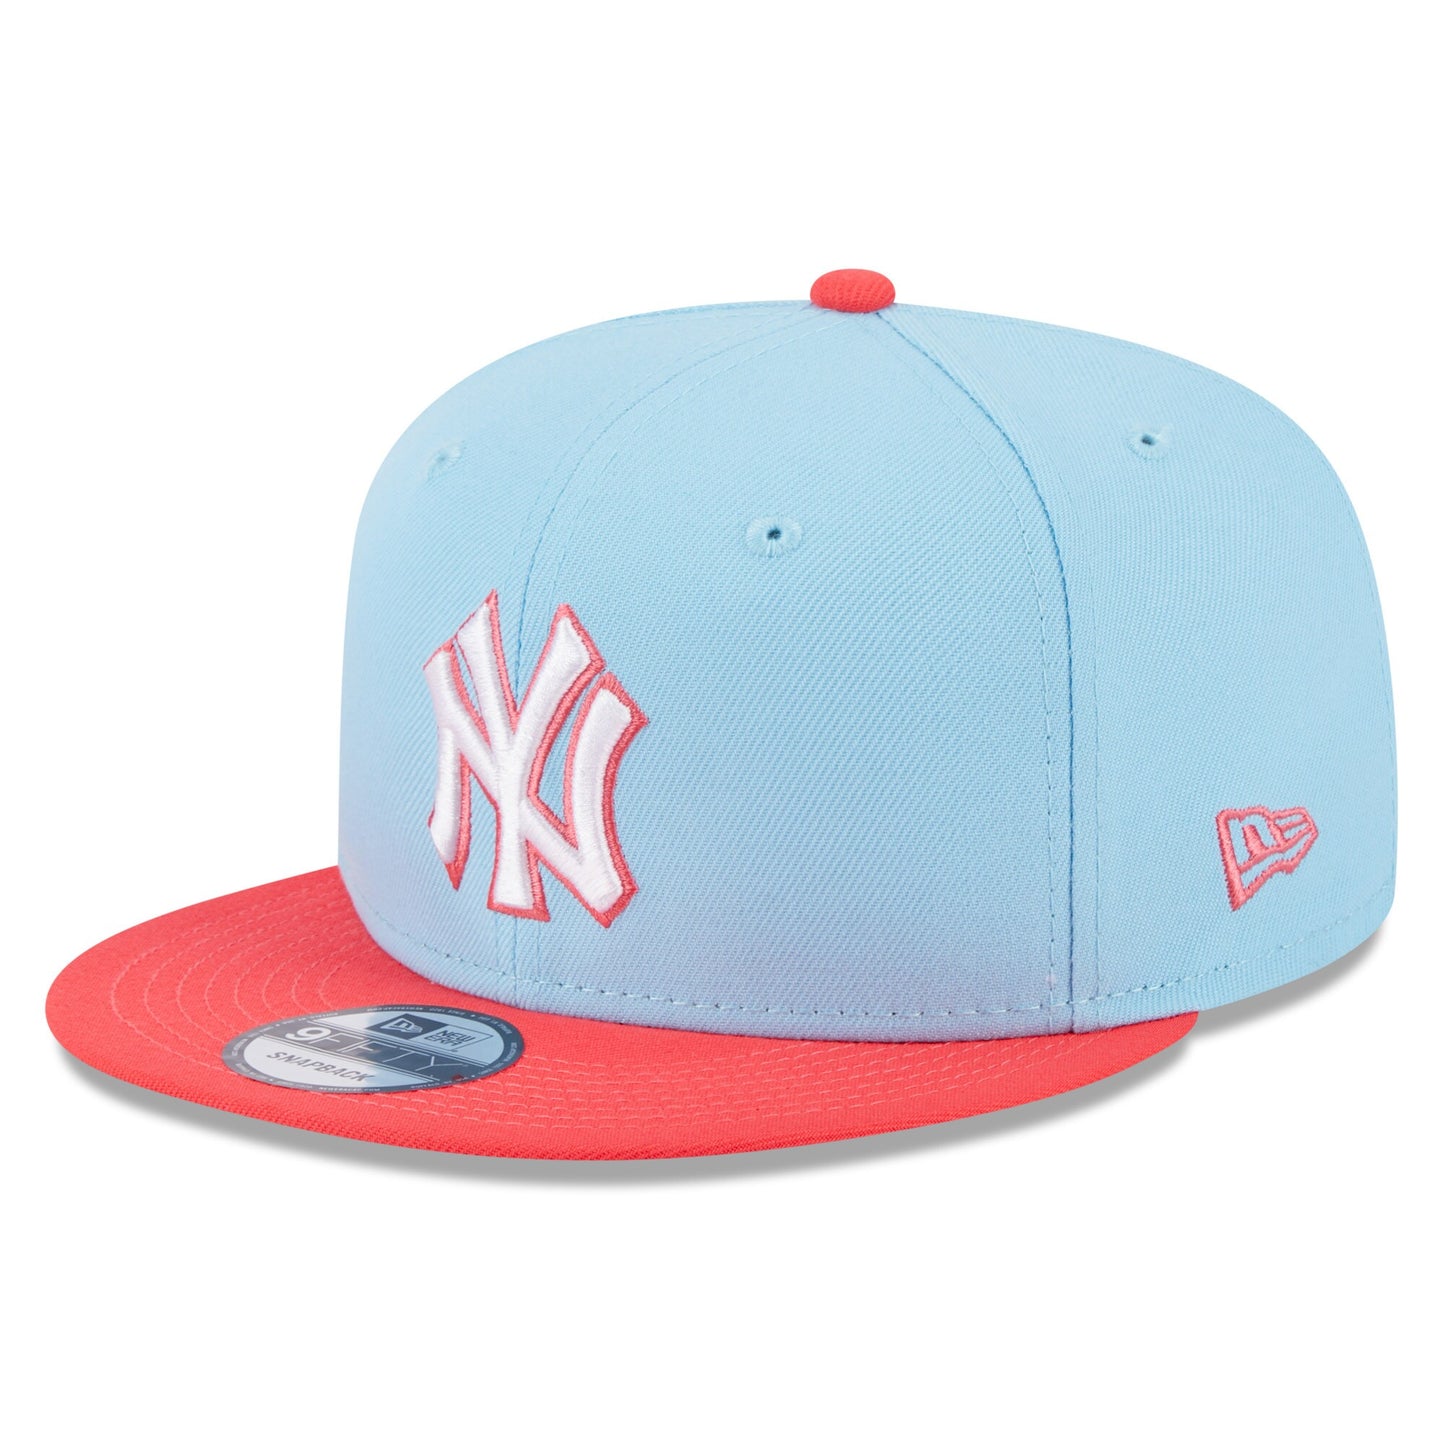 New York Yankees New Era Spring Basic Two-Tone 9FIFTY Snapback Hat - Light Blue/Red